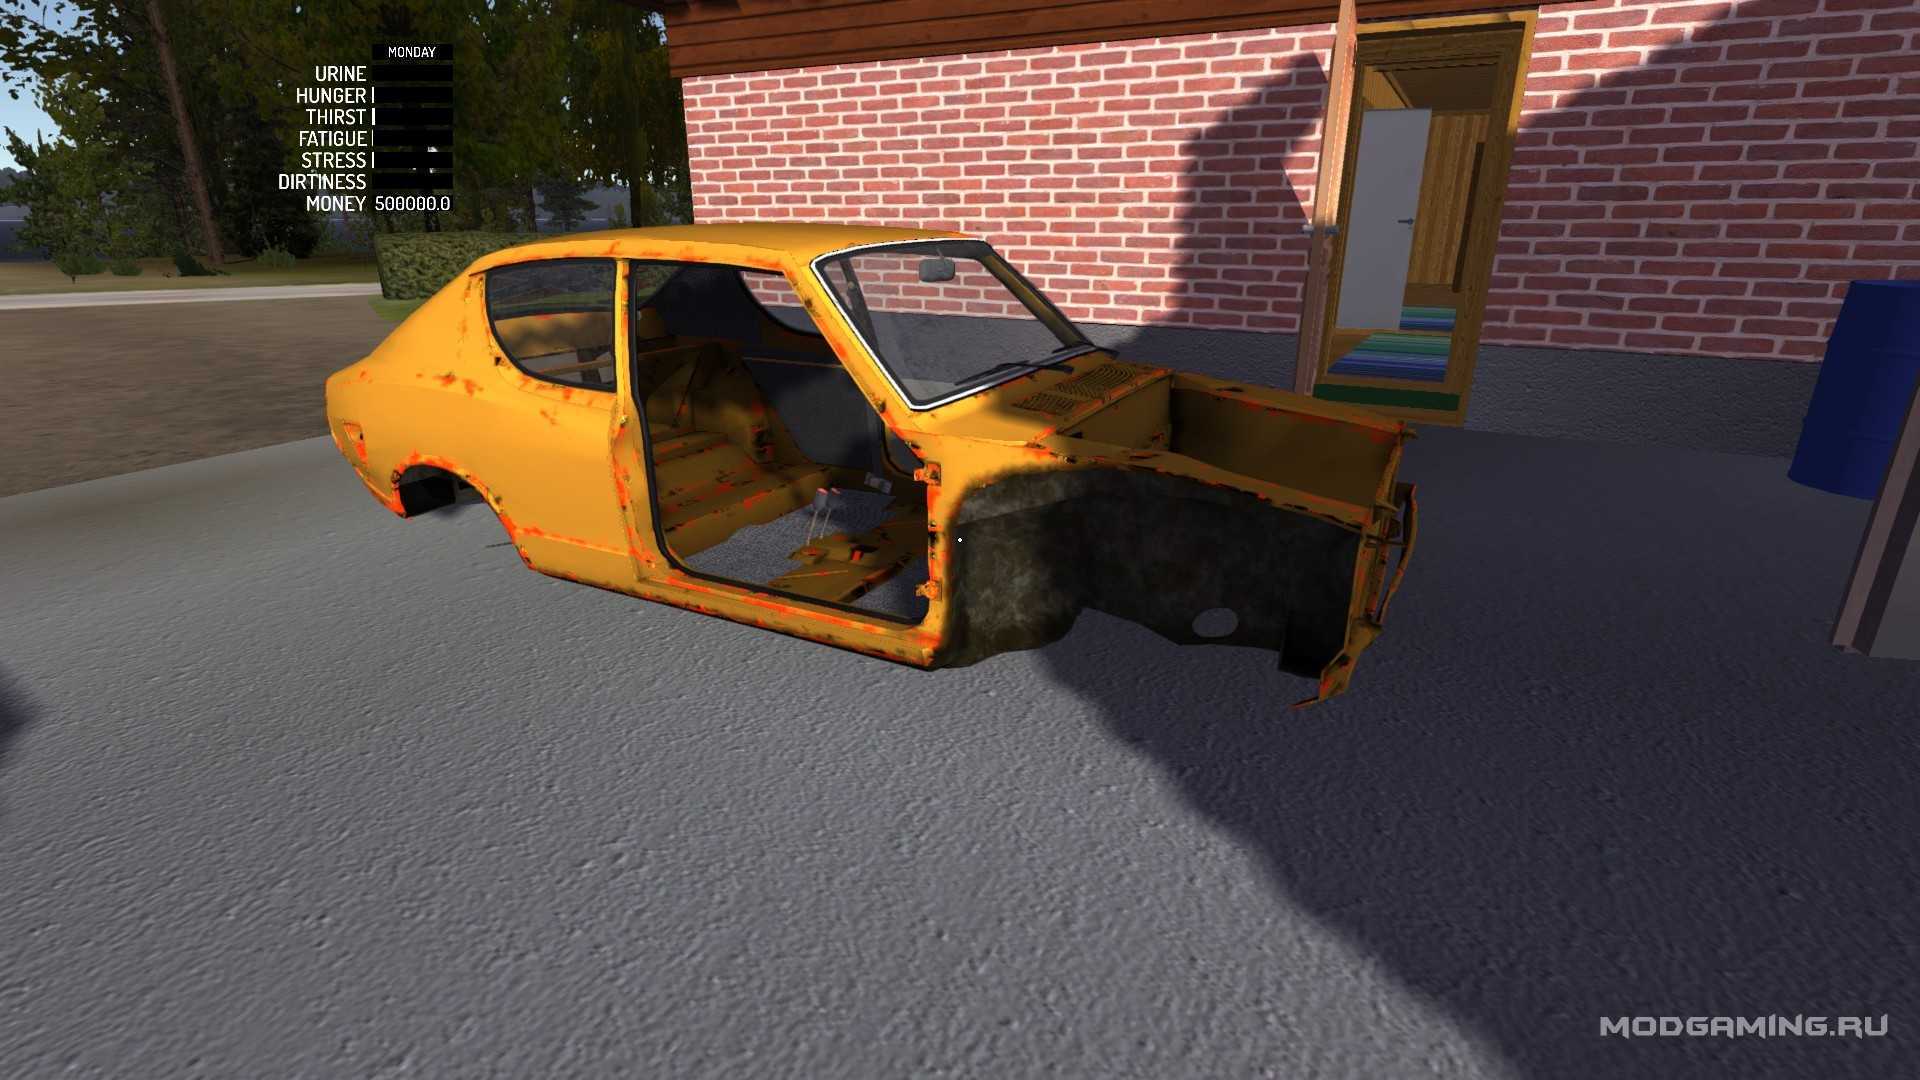 The village my summer car. Саммер кар. Машина из my Summer car. My Summer car ВАЗ 2106. Satsuma машина my Summer.